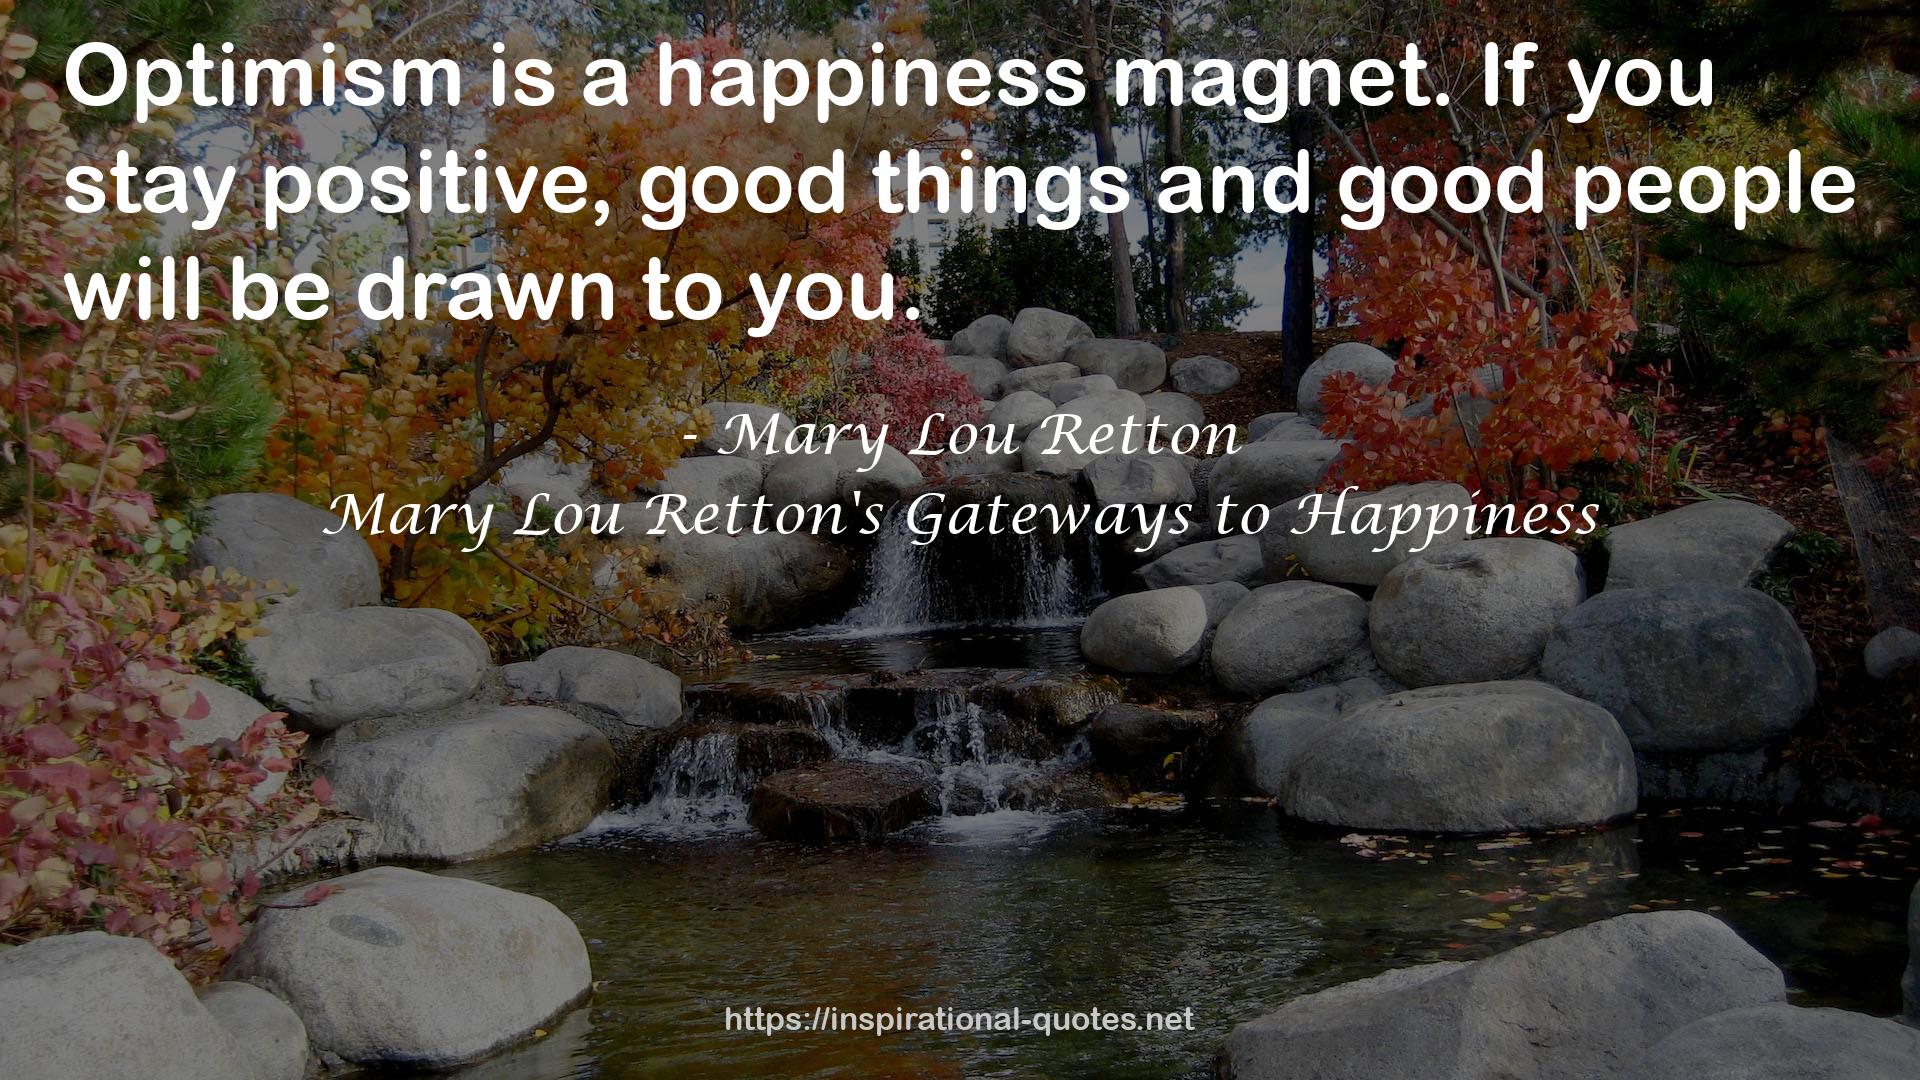 Mary Lou Retton's Gateways to Happiness QUOTES